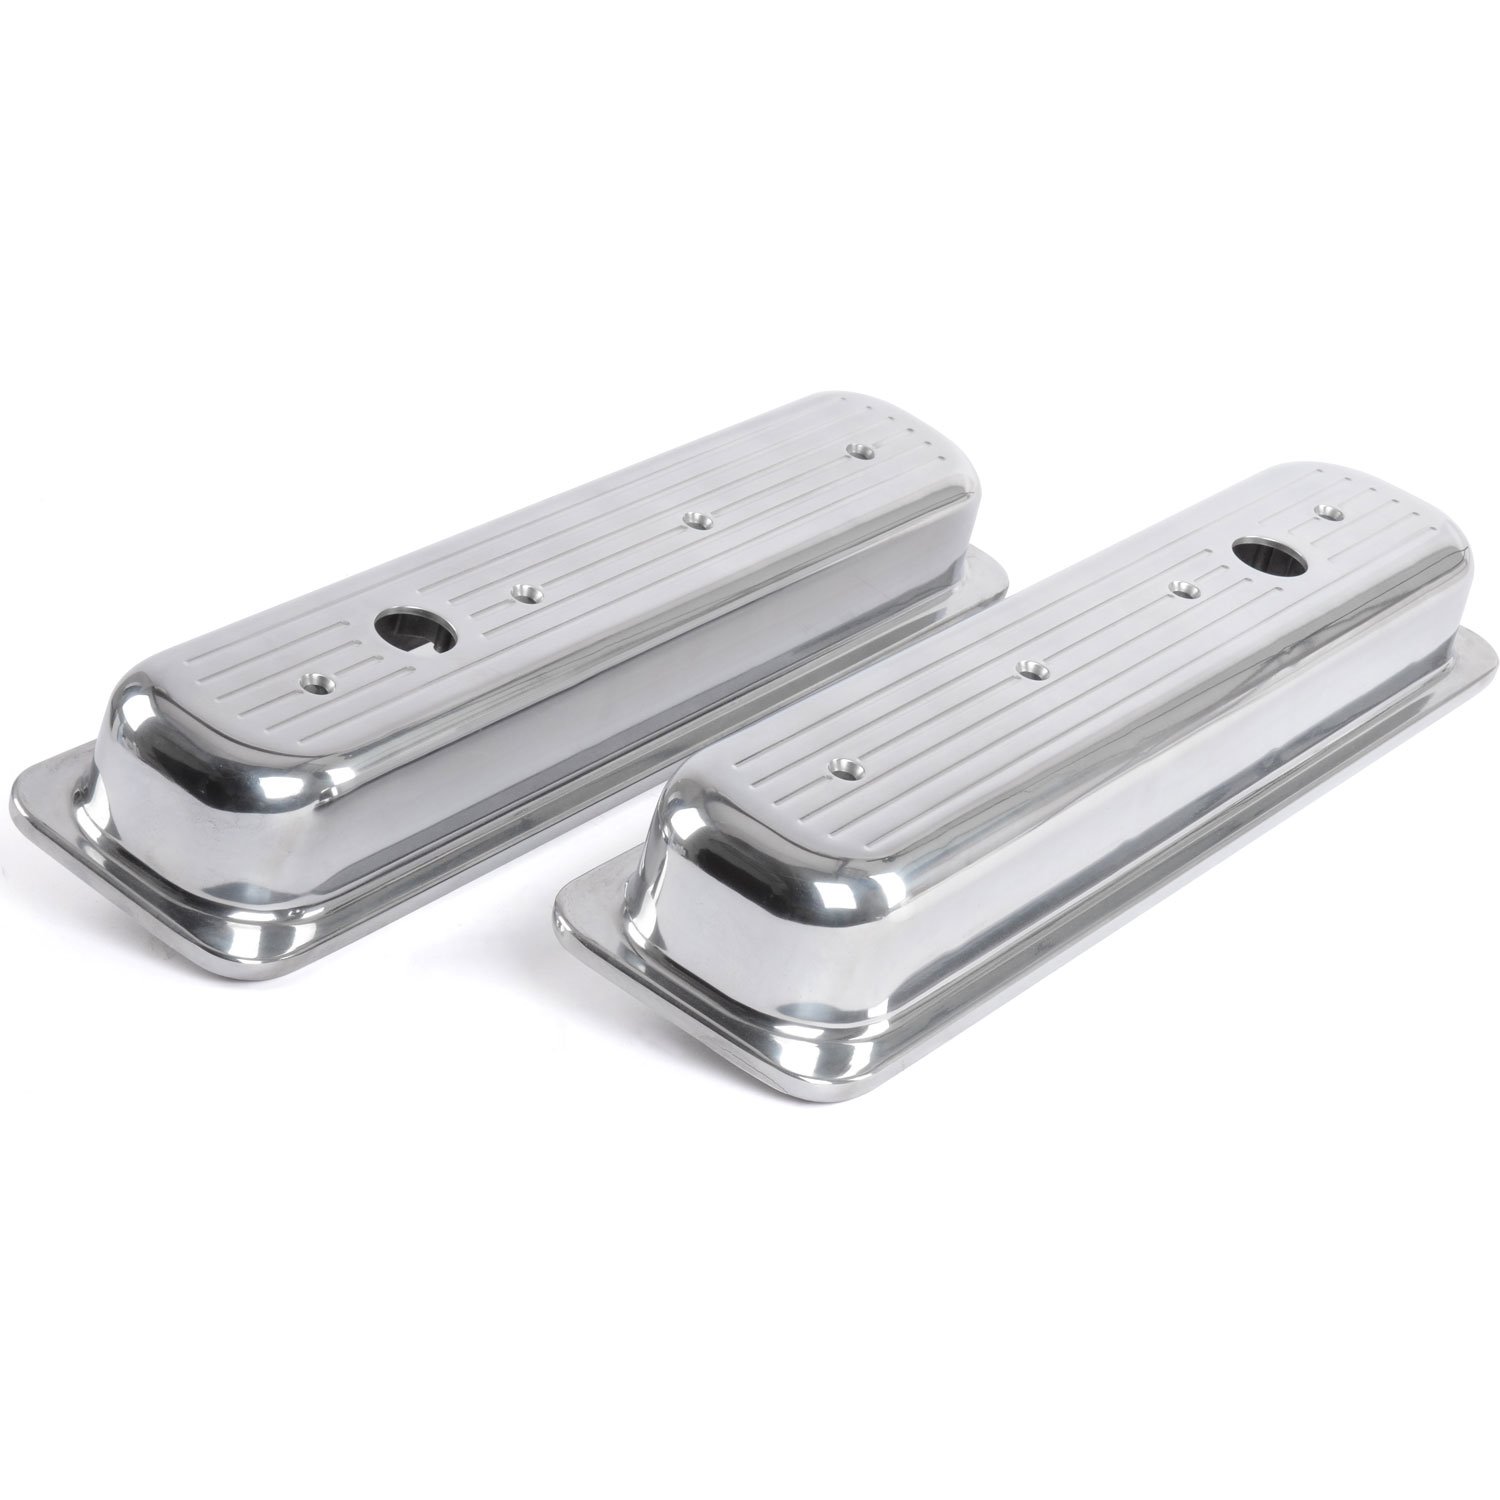 Polished Cast Aluminum Ball-Milled Valve Covers for 1987-1999 5.0L-5.7L Small Block Chevy